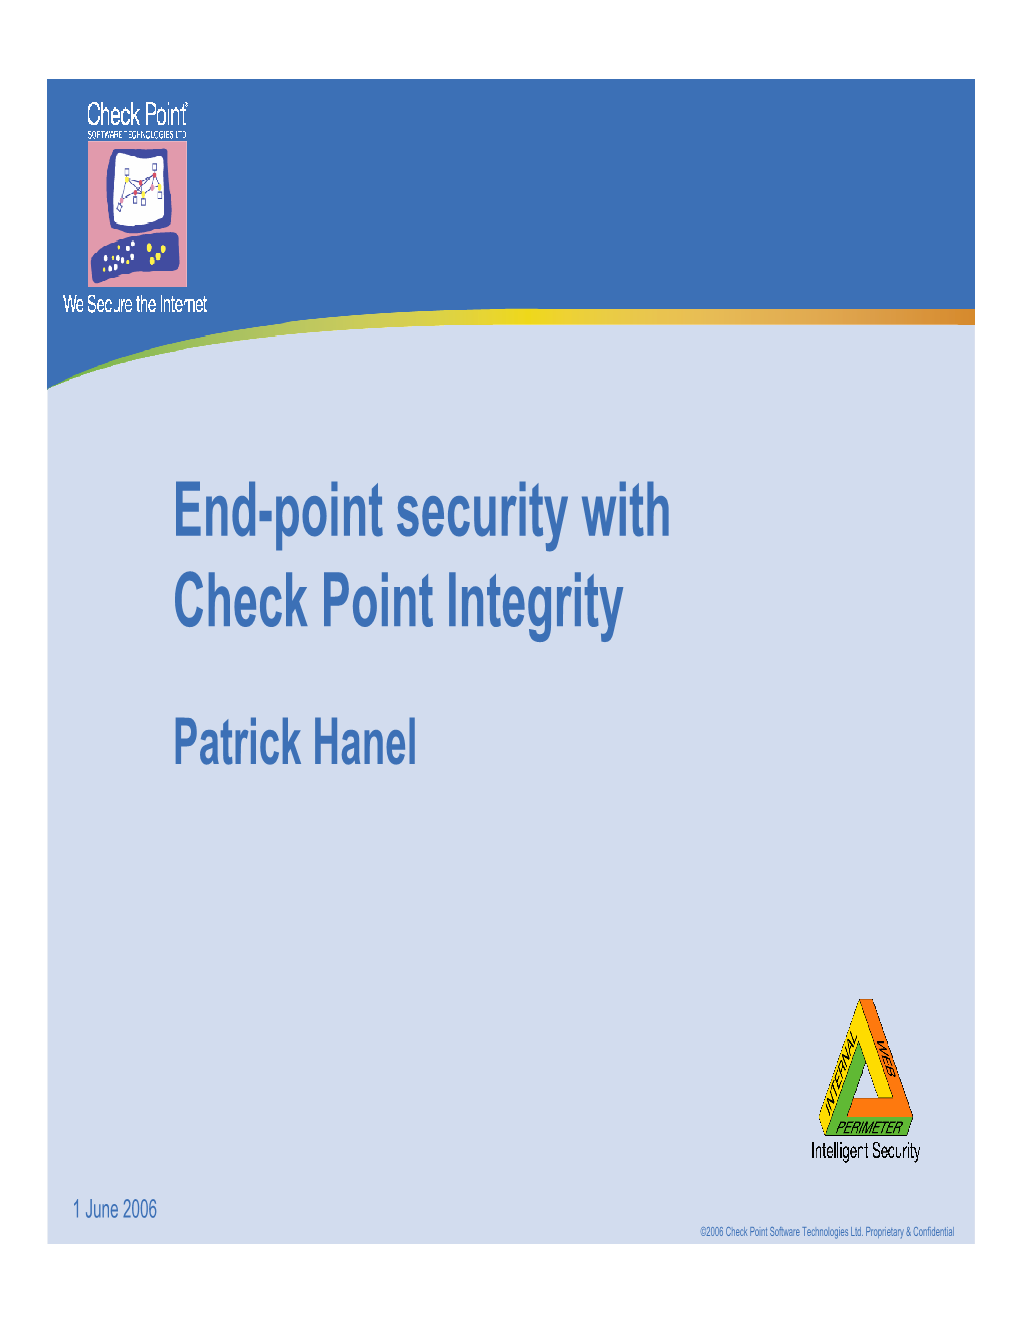 End-Point Security with Check Point Integrity